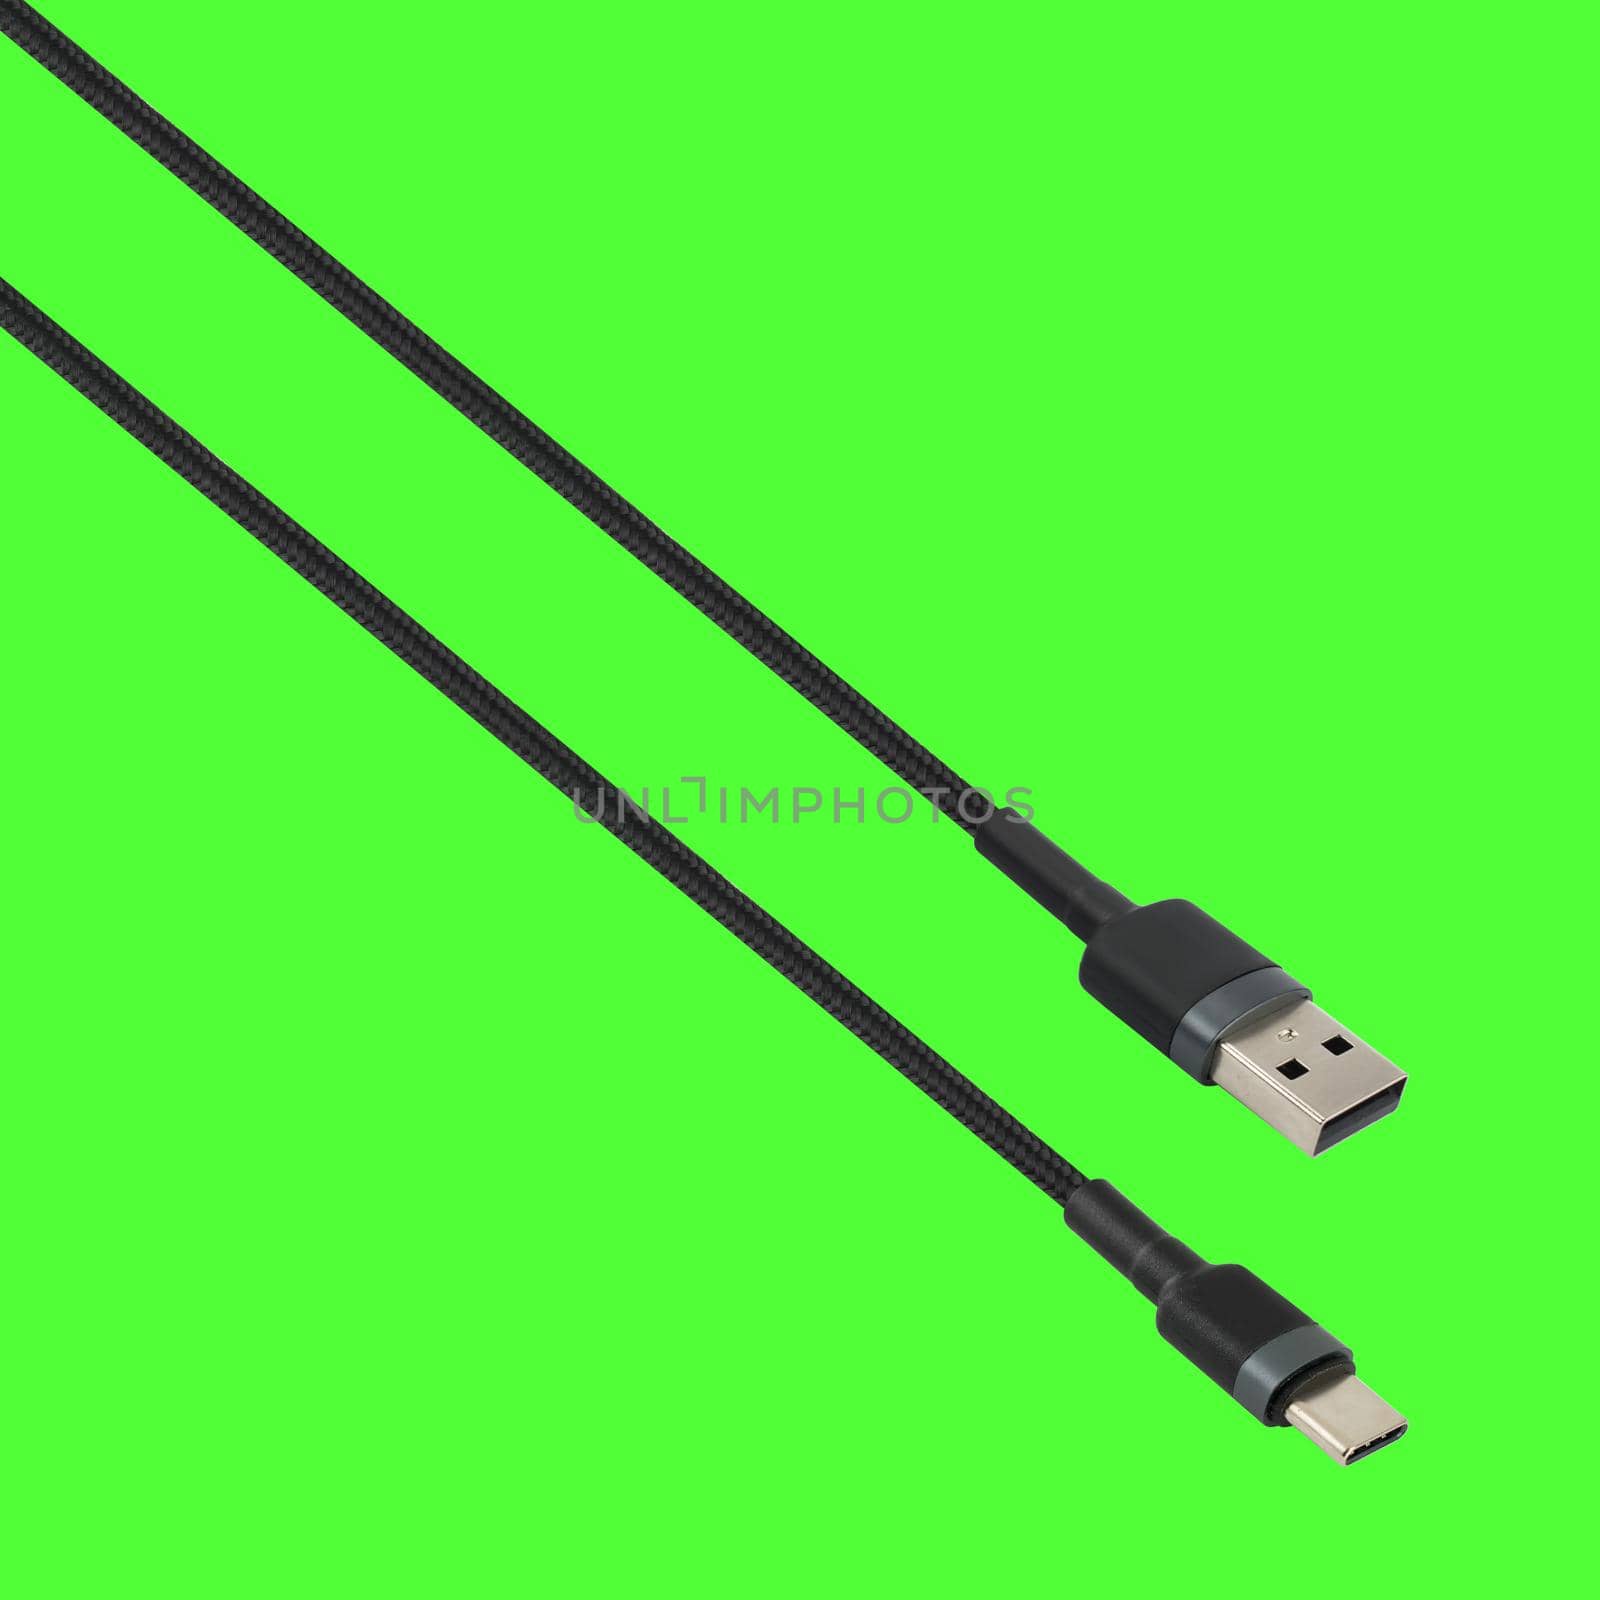 Cable with USB and Type-C connector, on white background